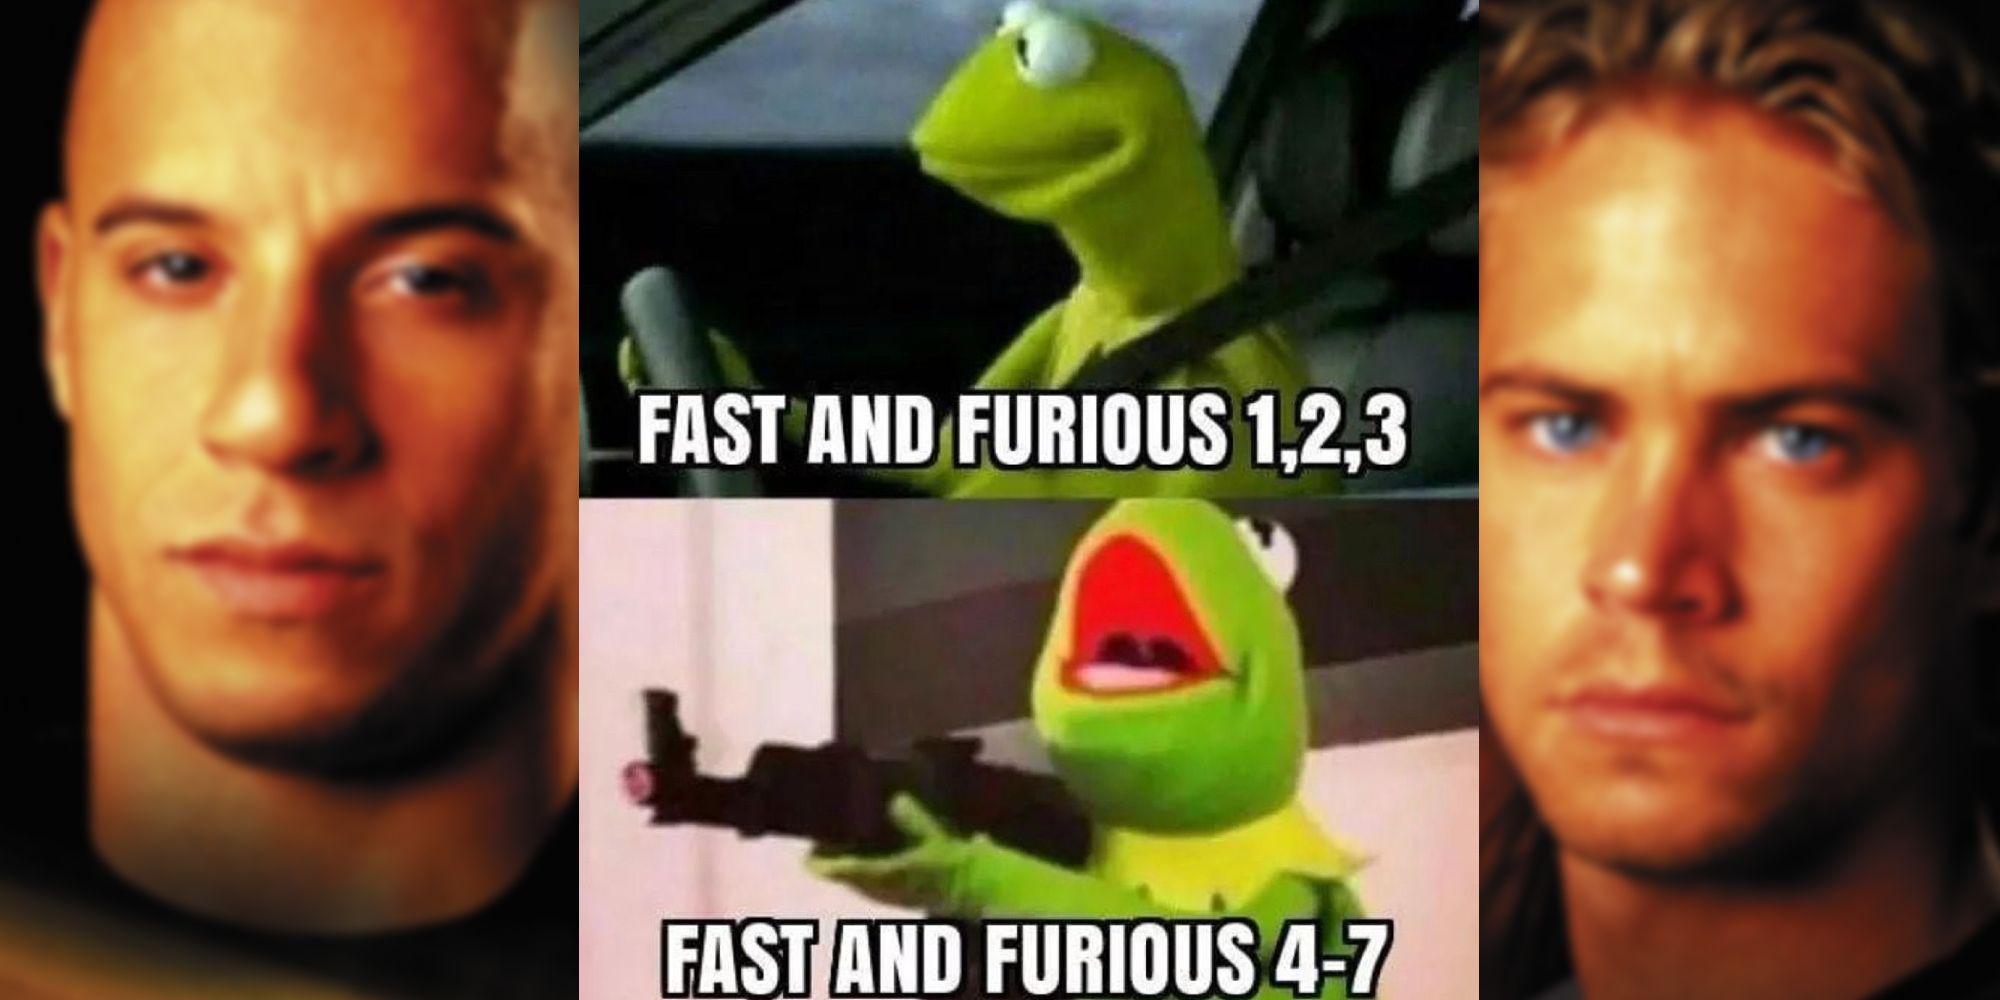 Kermit in a Fast and Furious meme.